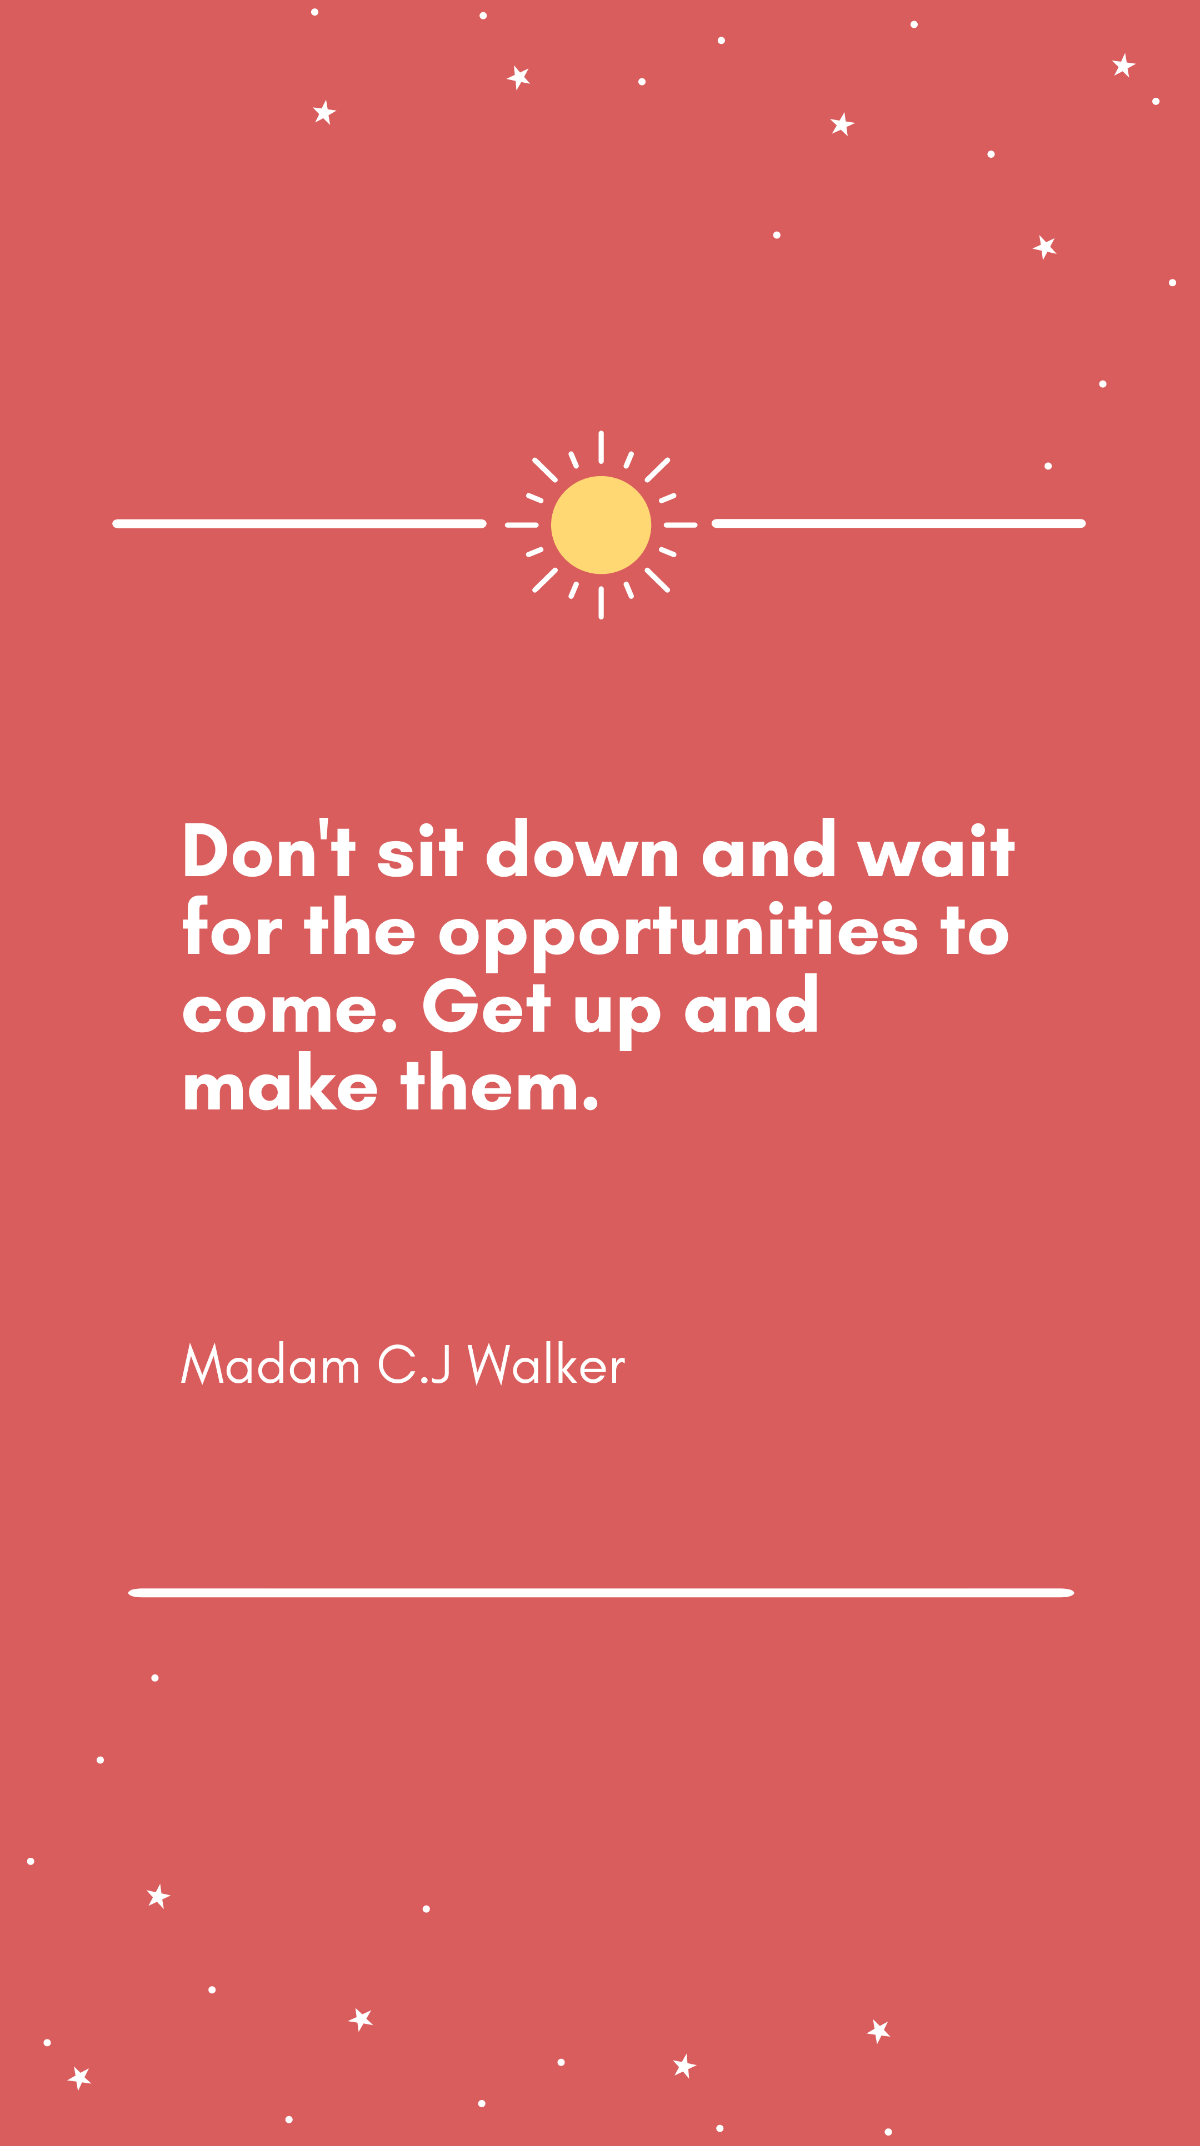 Madam C.J Walker - Don't sit down and wait for the opportunities to come. Get up and make them Template